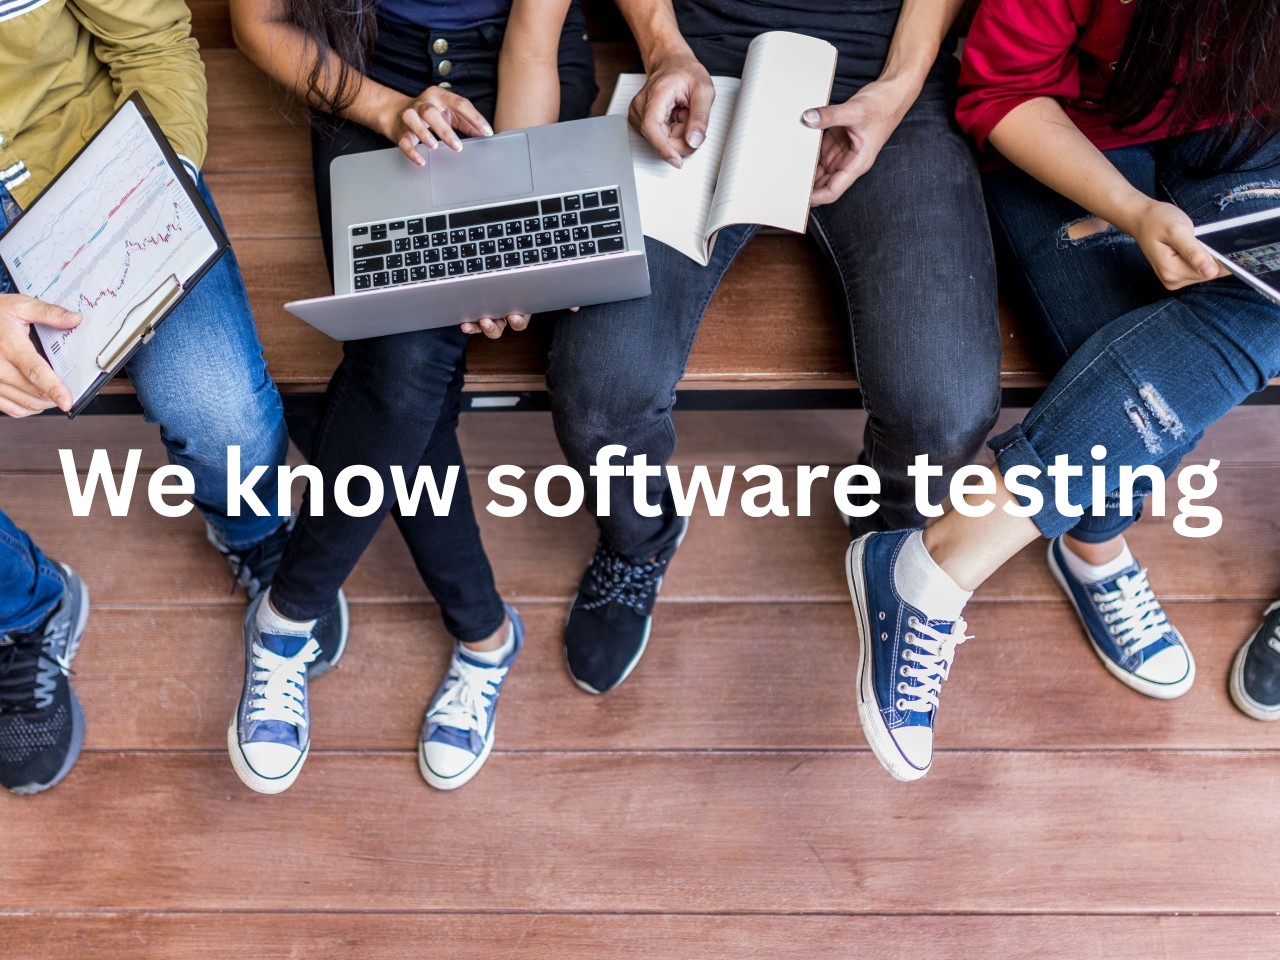 We know software testing